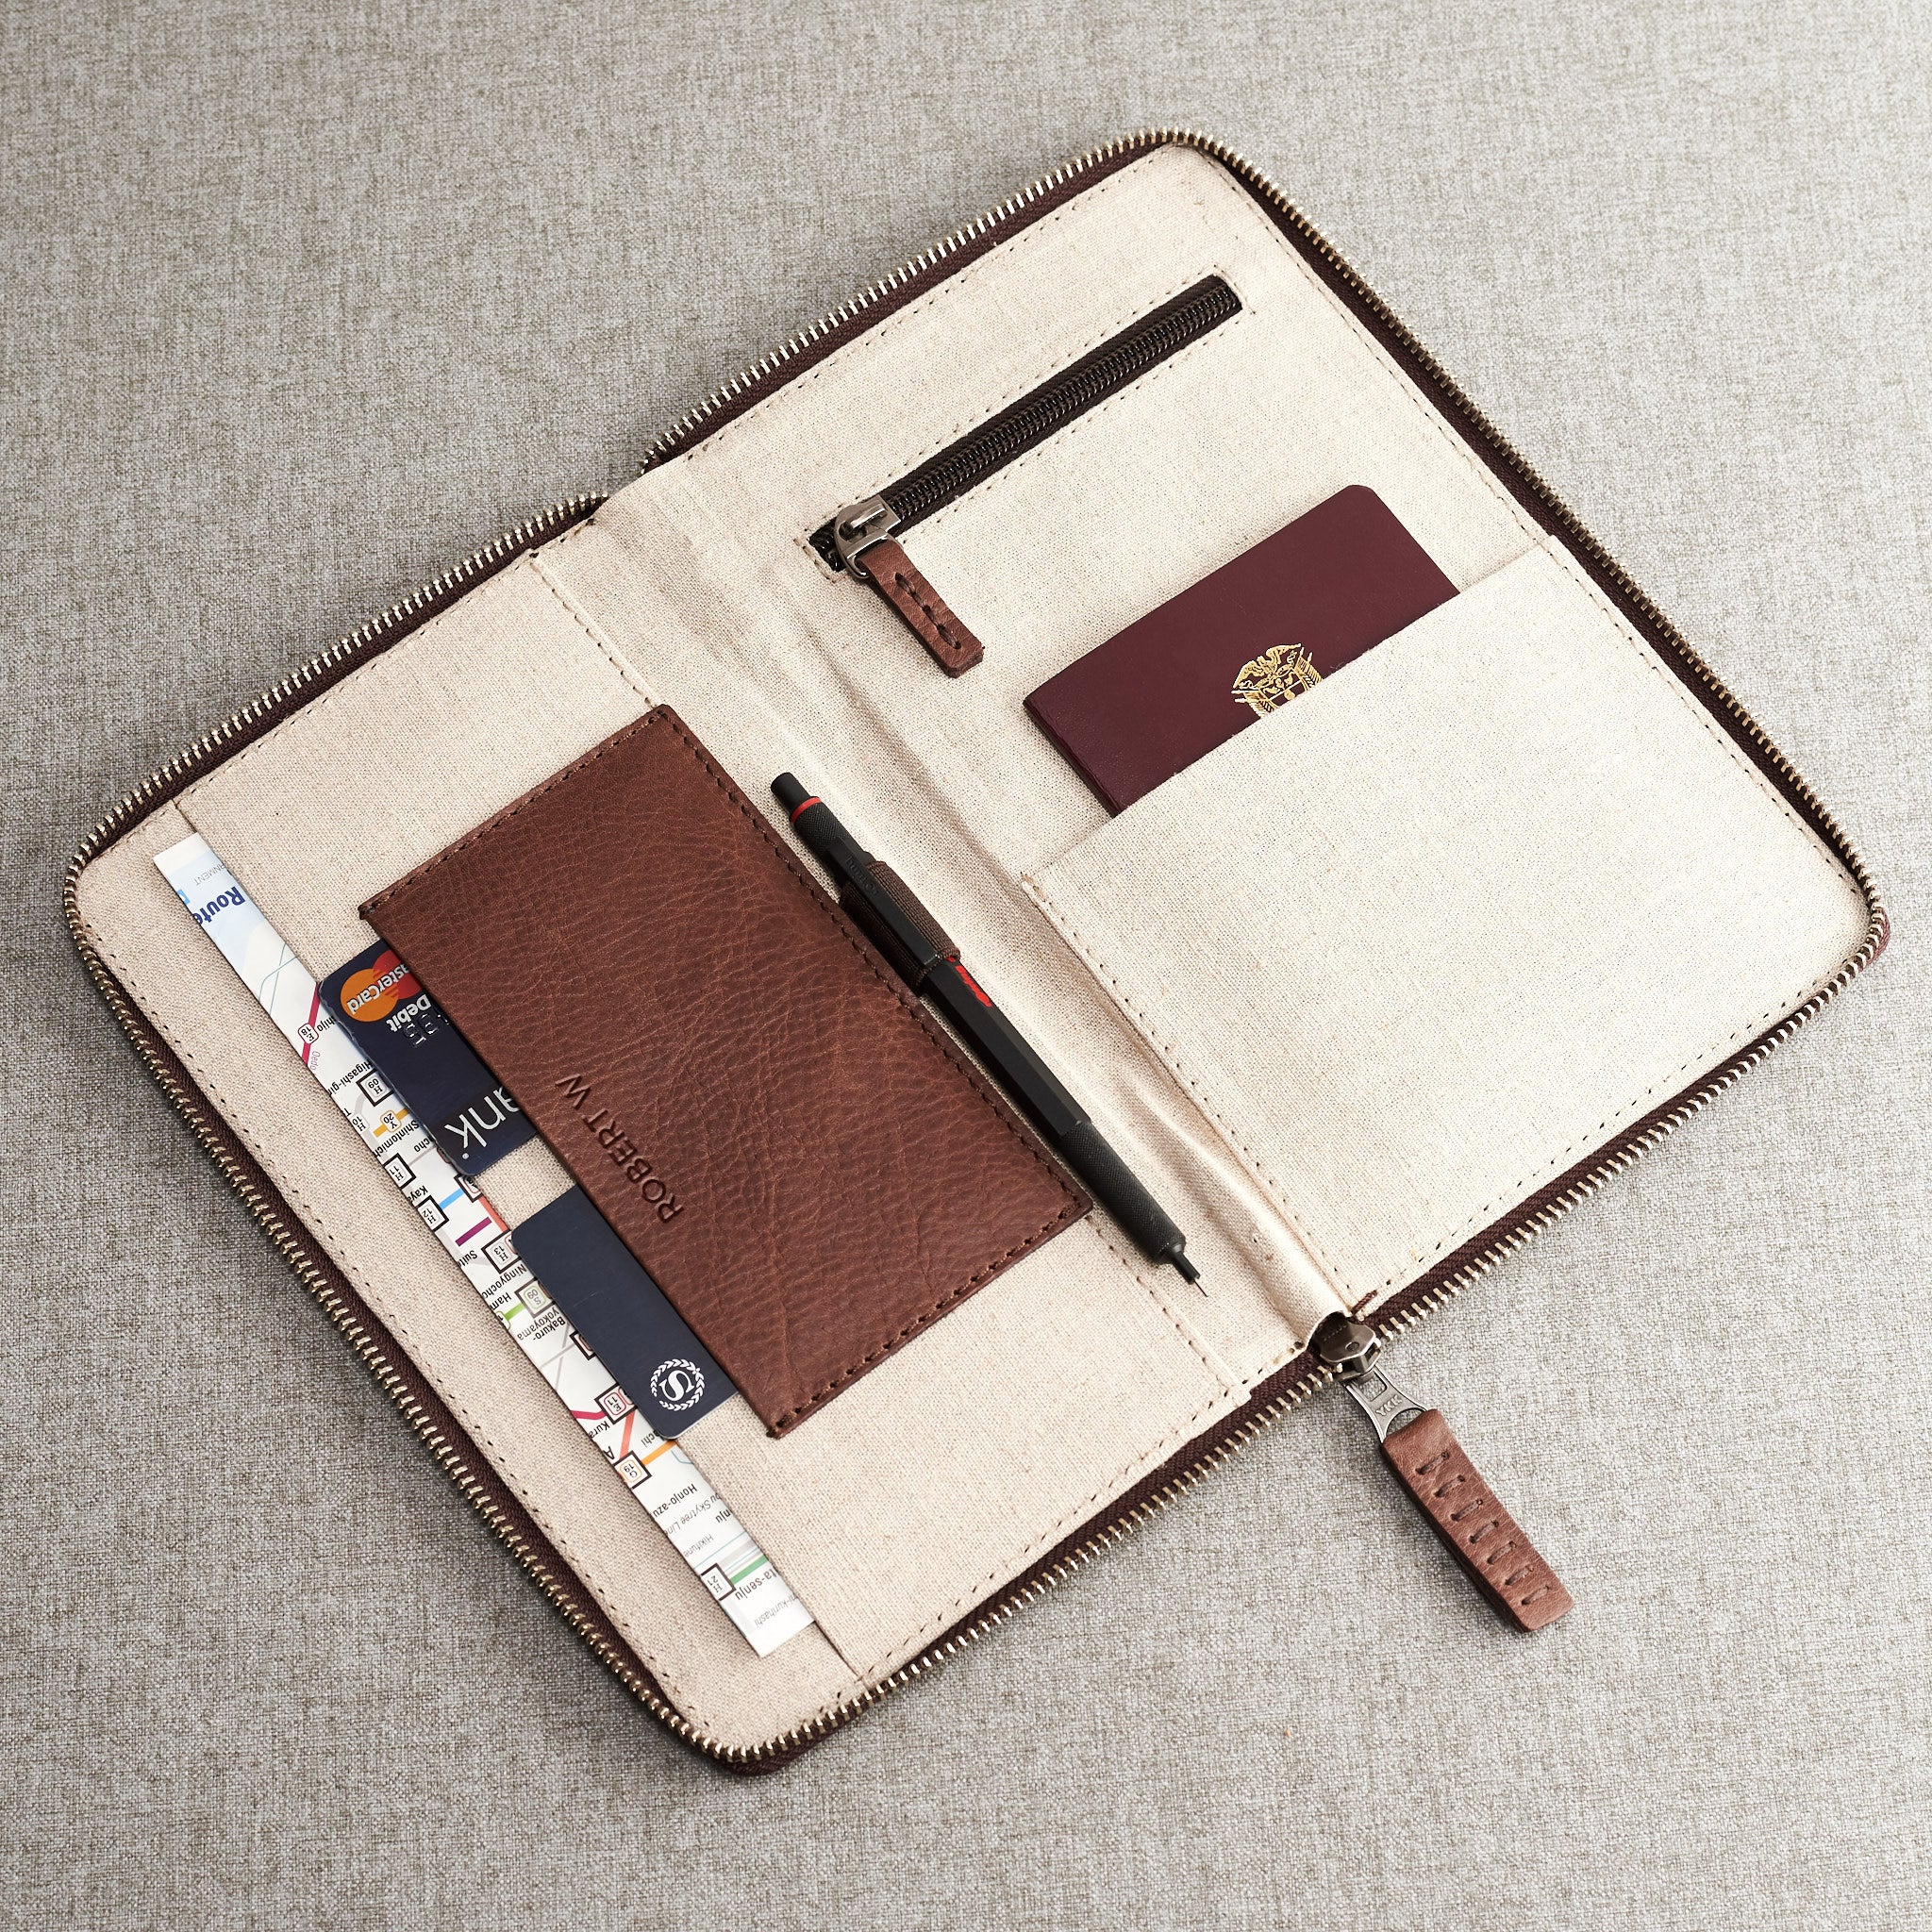 Leather Traveler Wallet For Passport, Cards, and Travel Documents